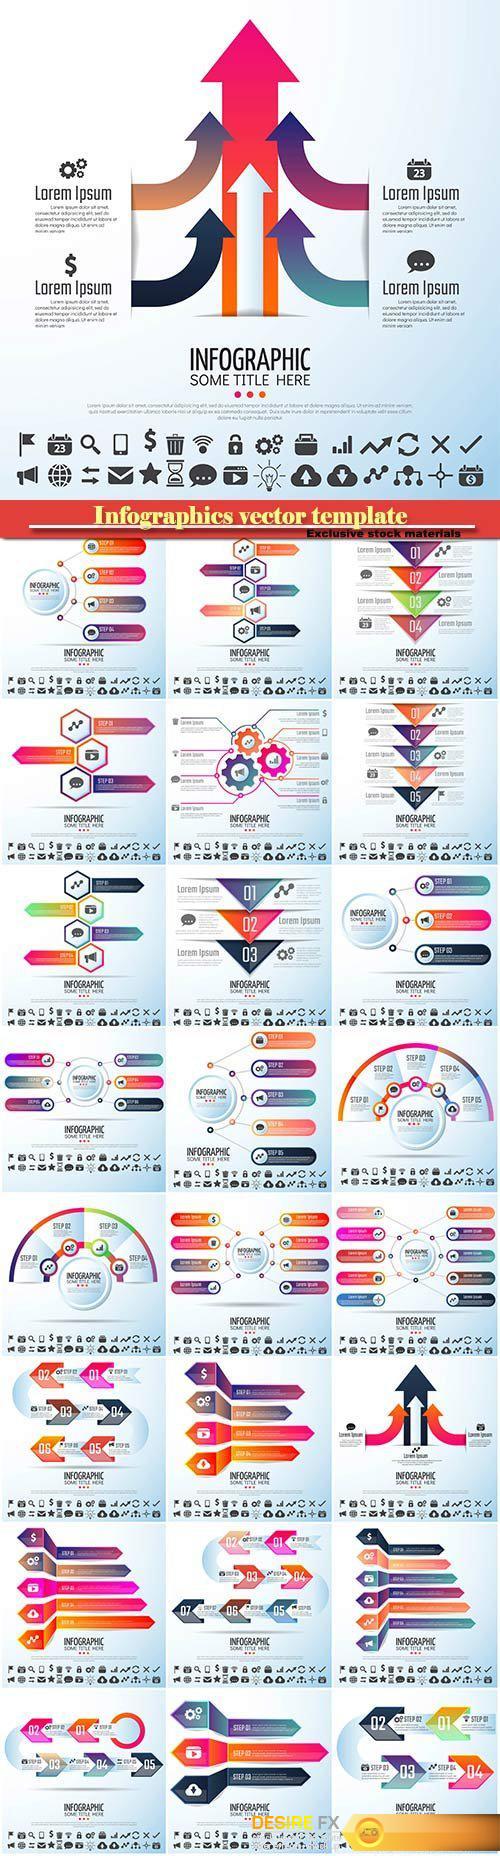 Infographics vector template for business presentations or information banner # 4